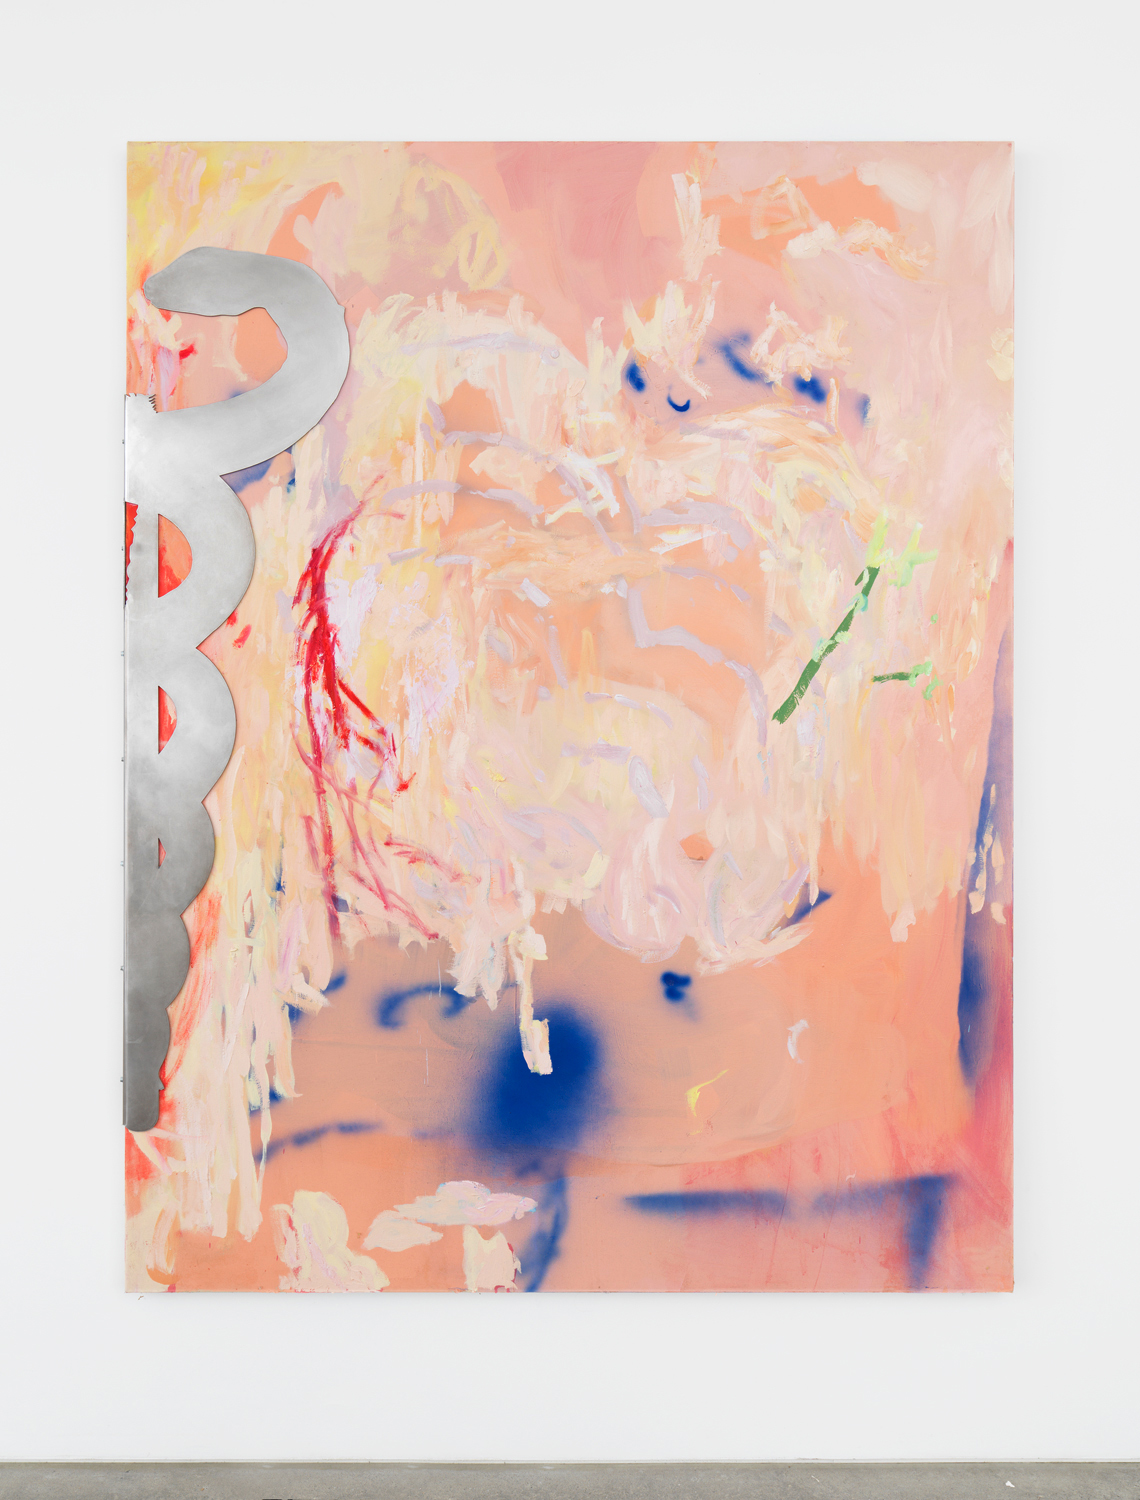 Rachel Rossin, Caduceus with a New Vein Thicket, 2021, Oil, acrylic, airbrushed acrylic, spray paint, enamel and aluminum on canvas, 78.25h x 60w in.